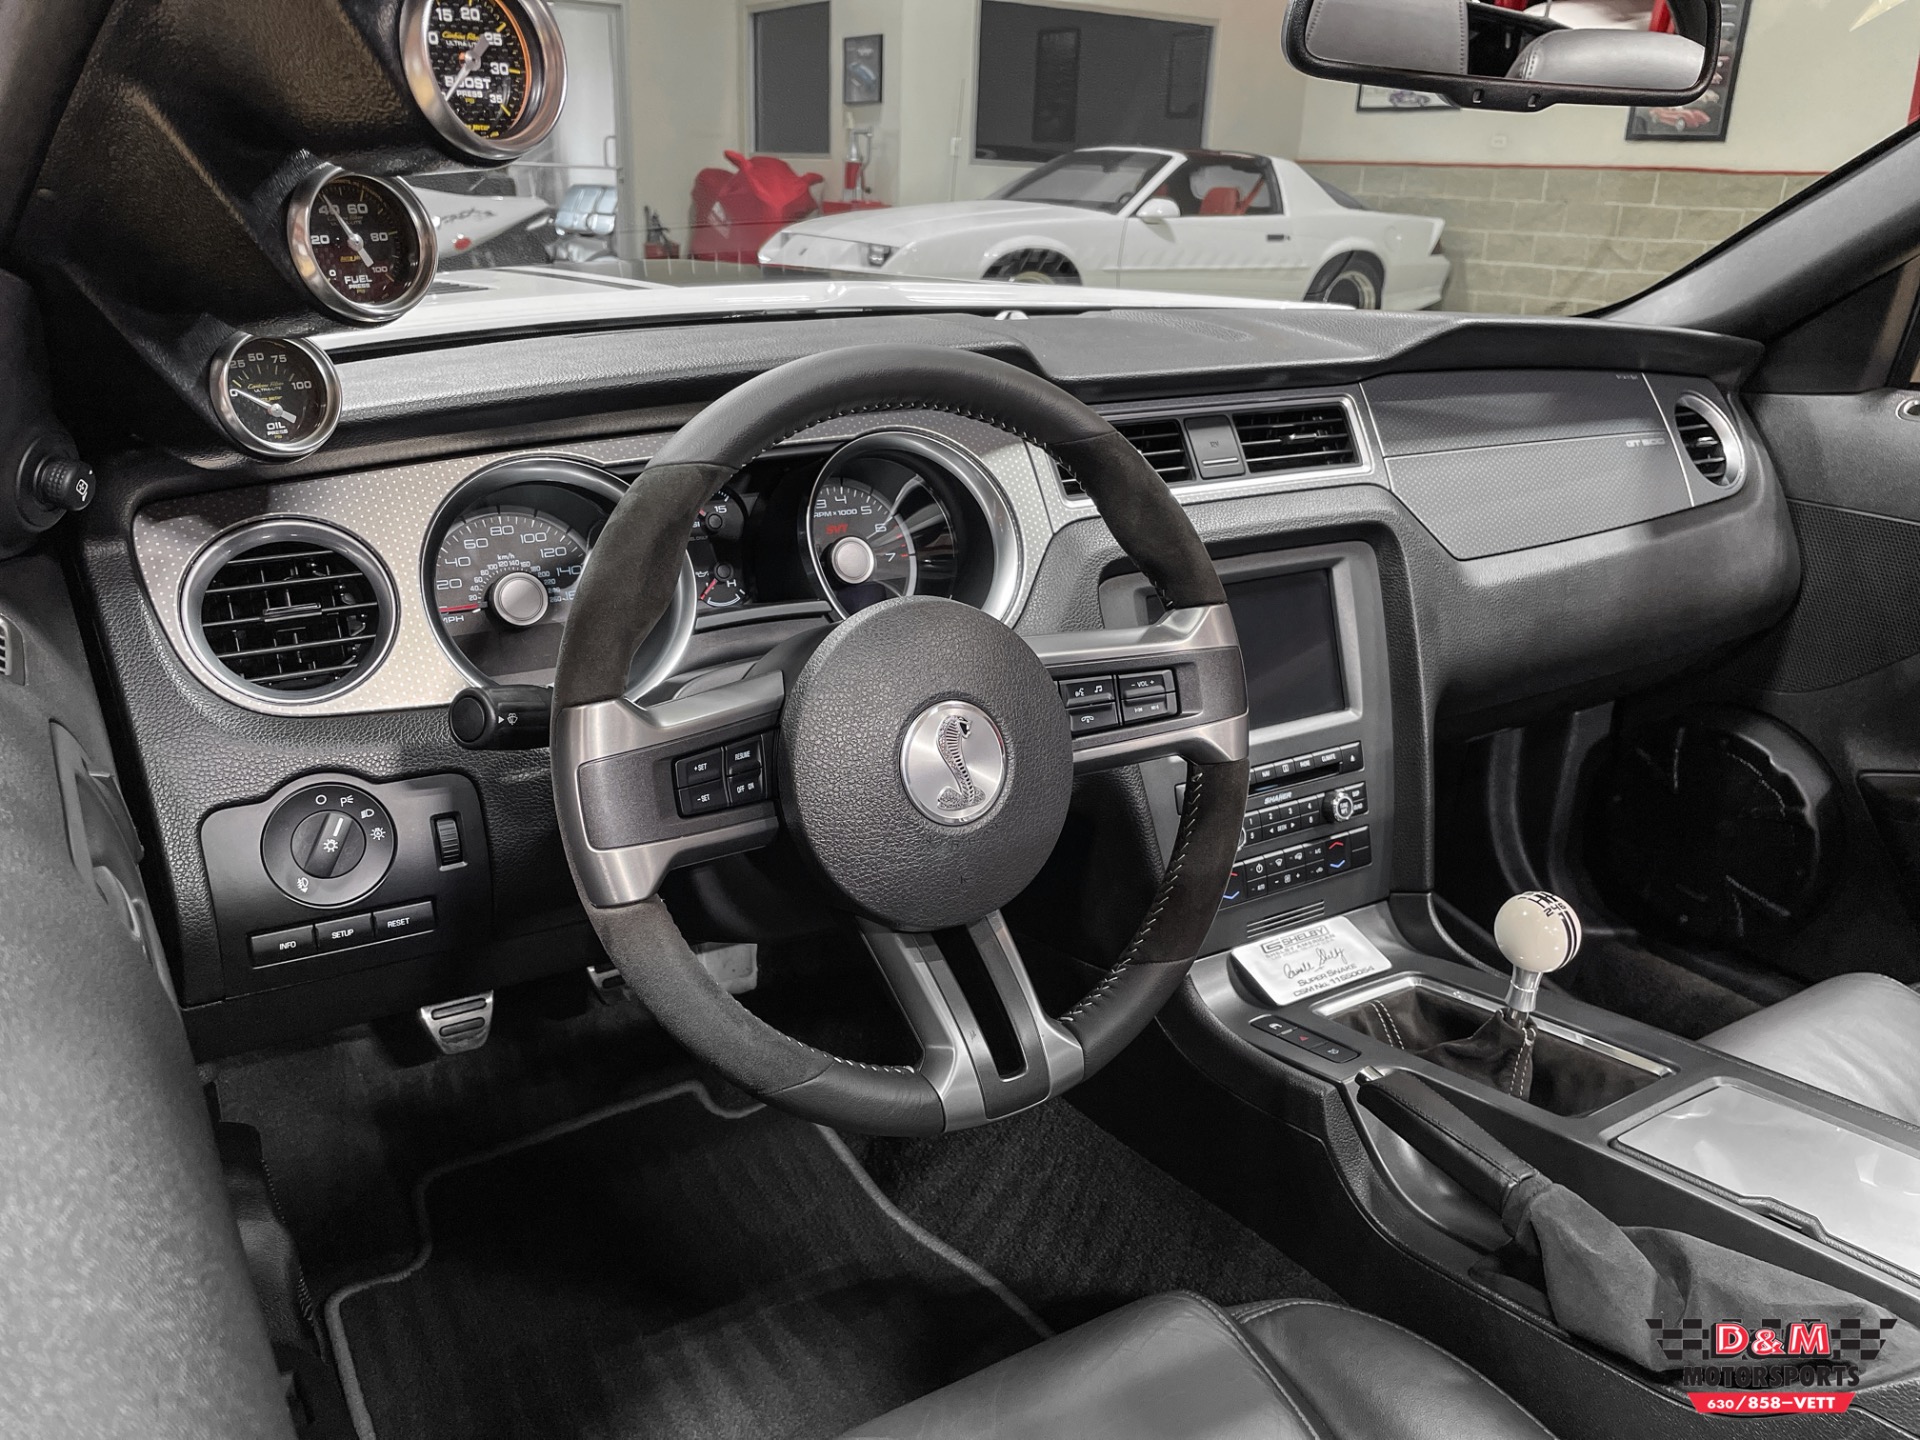 Used 2011 Ford Shelby GT500 Super Snake Convertible | Glen Ellyn, IL